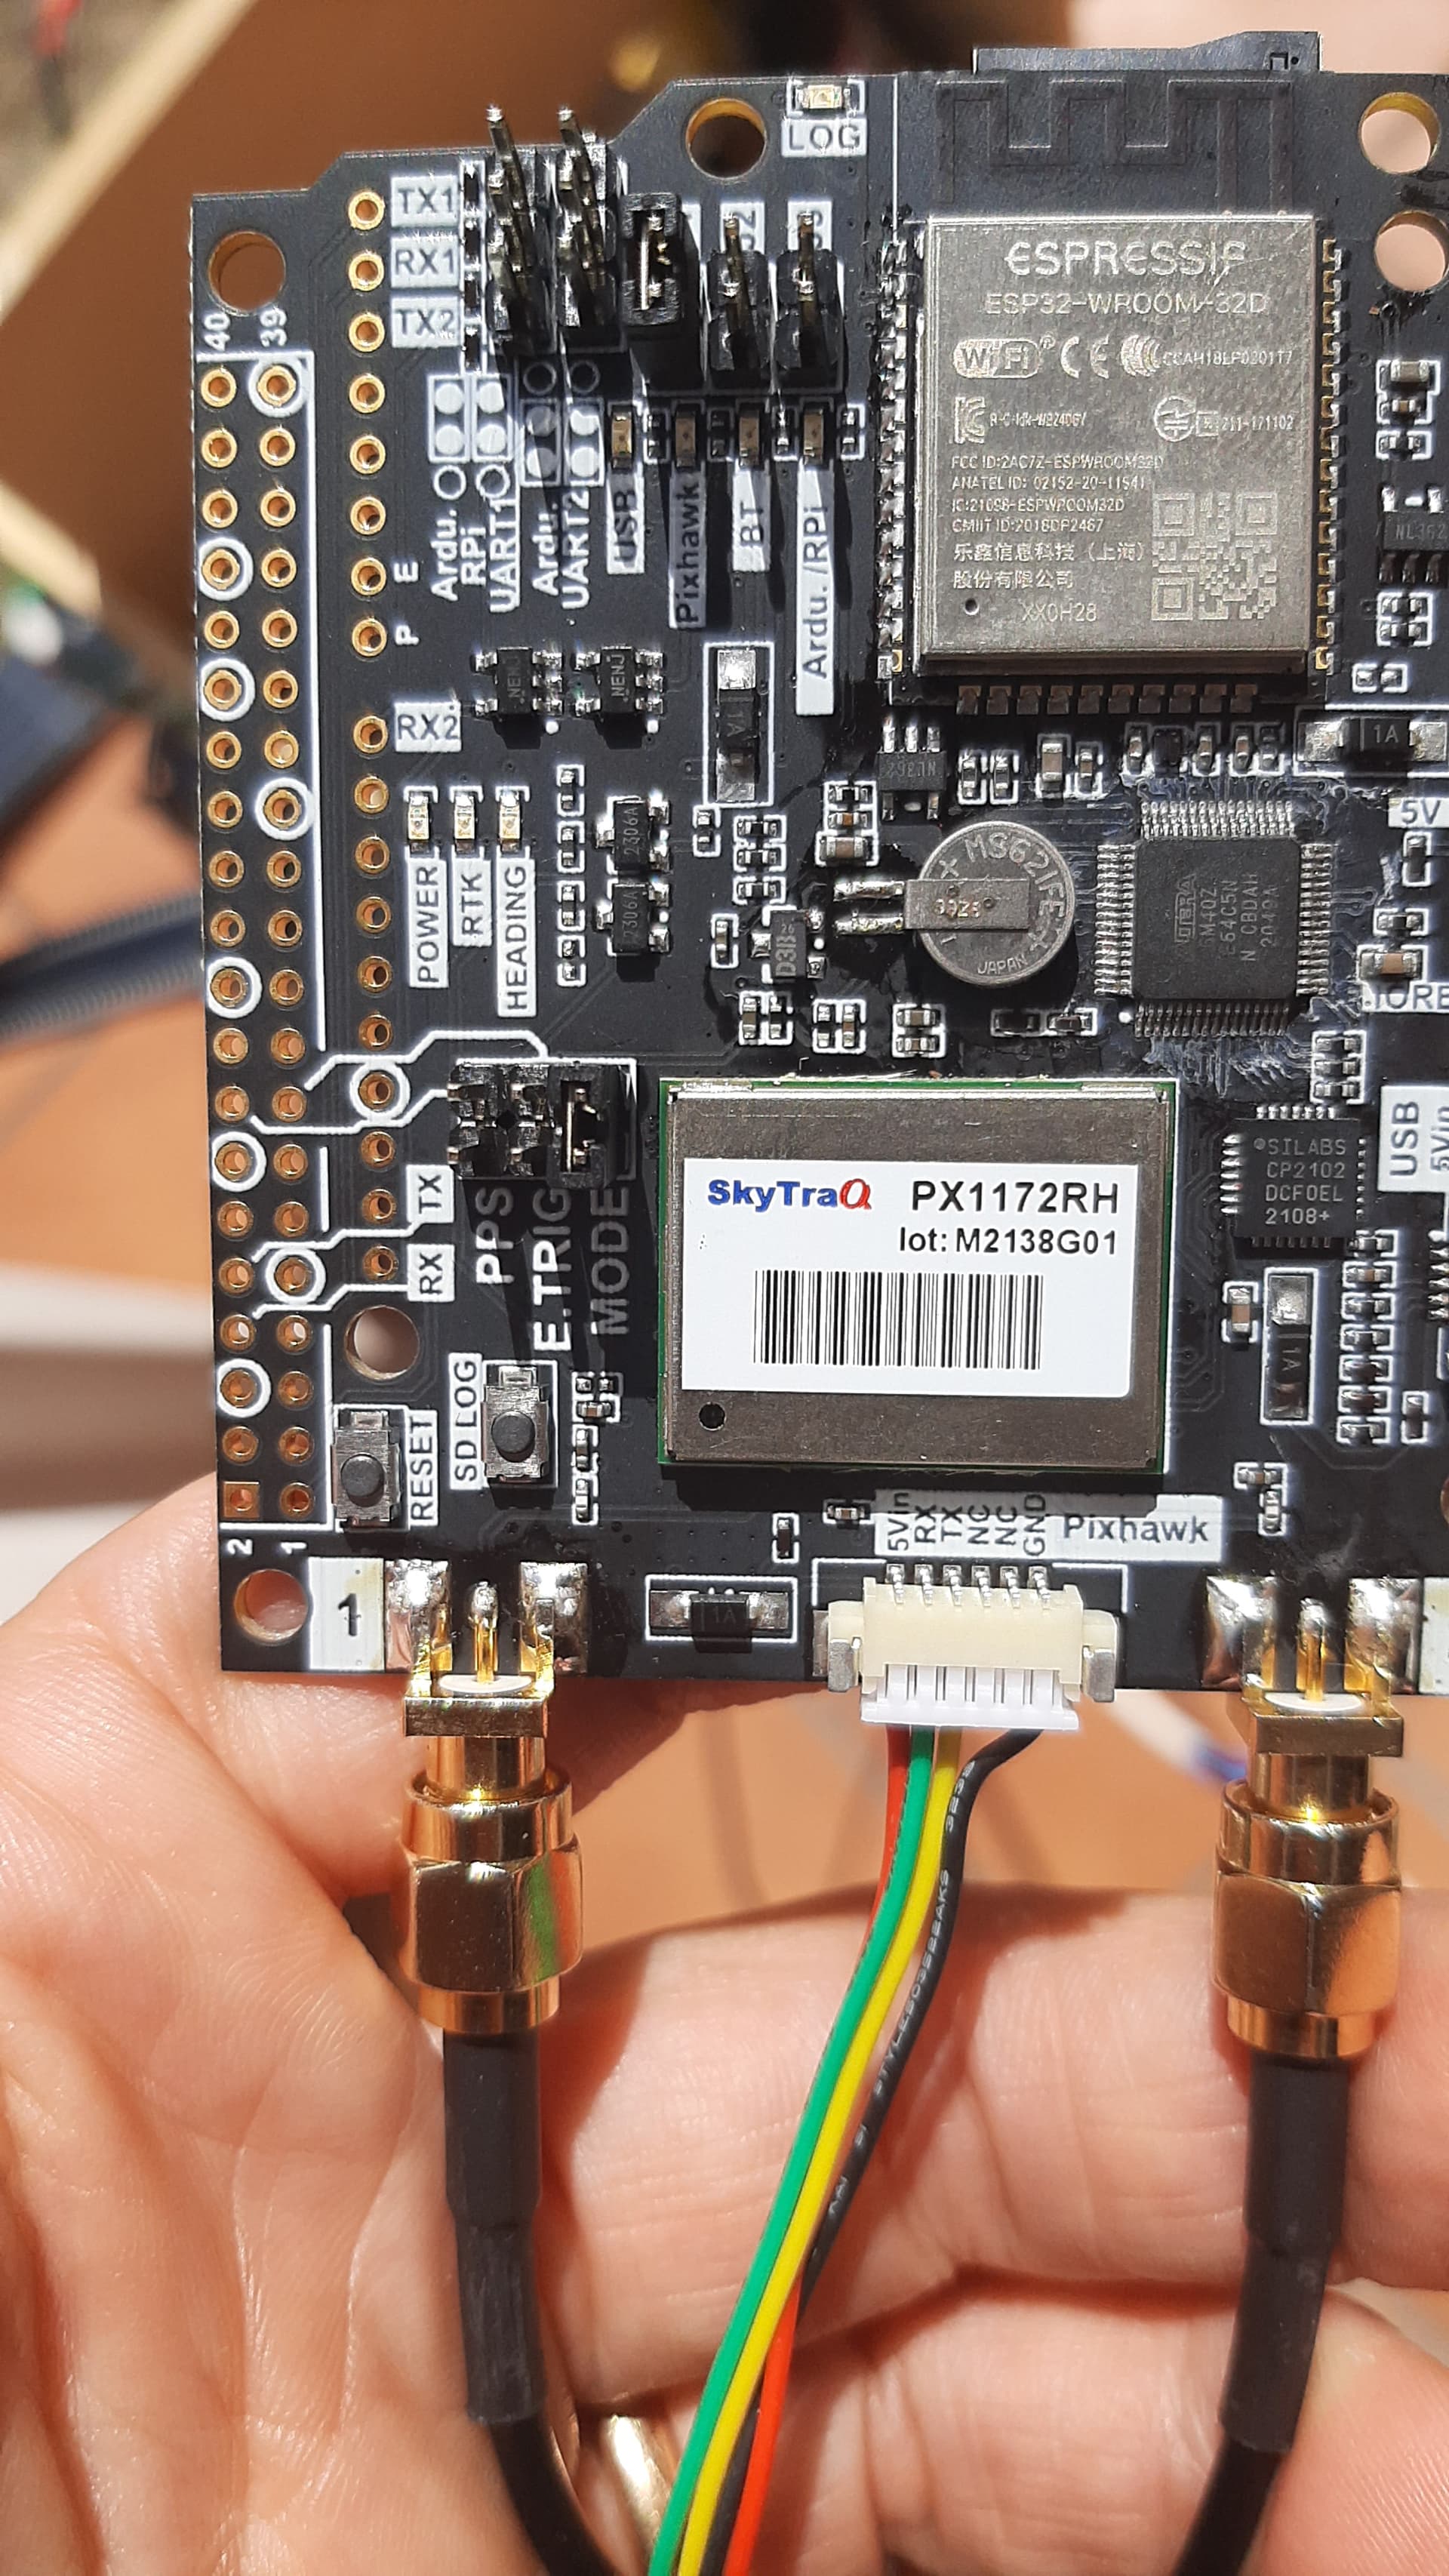 No GPS using PX1172RH-HAT board with pixhawk - Rover 4.1